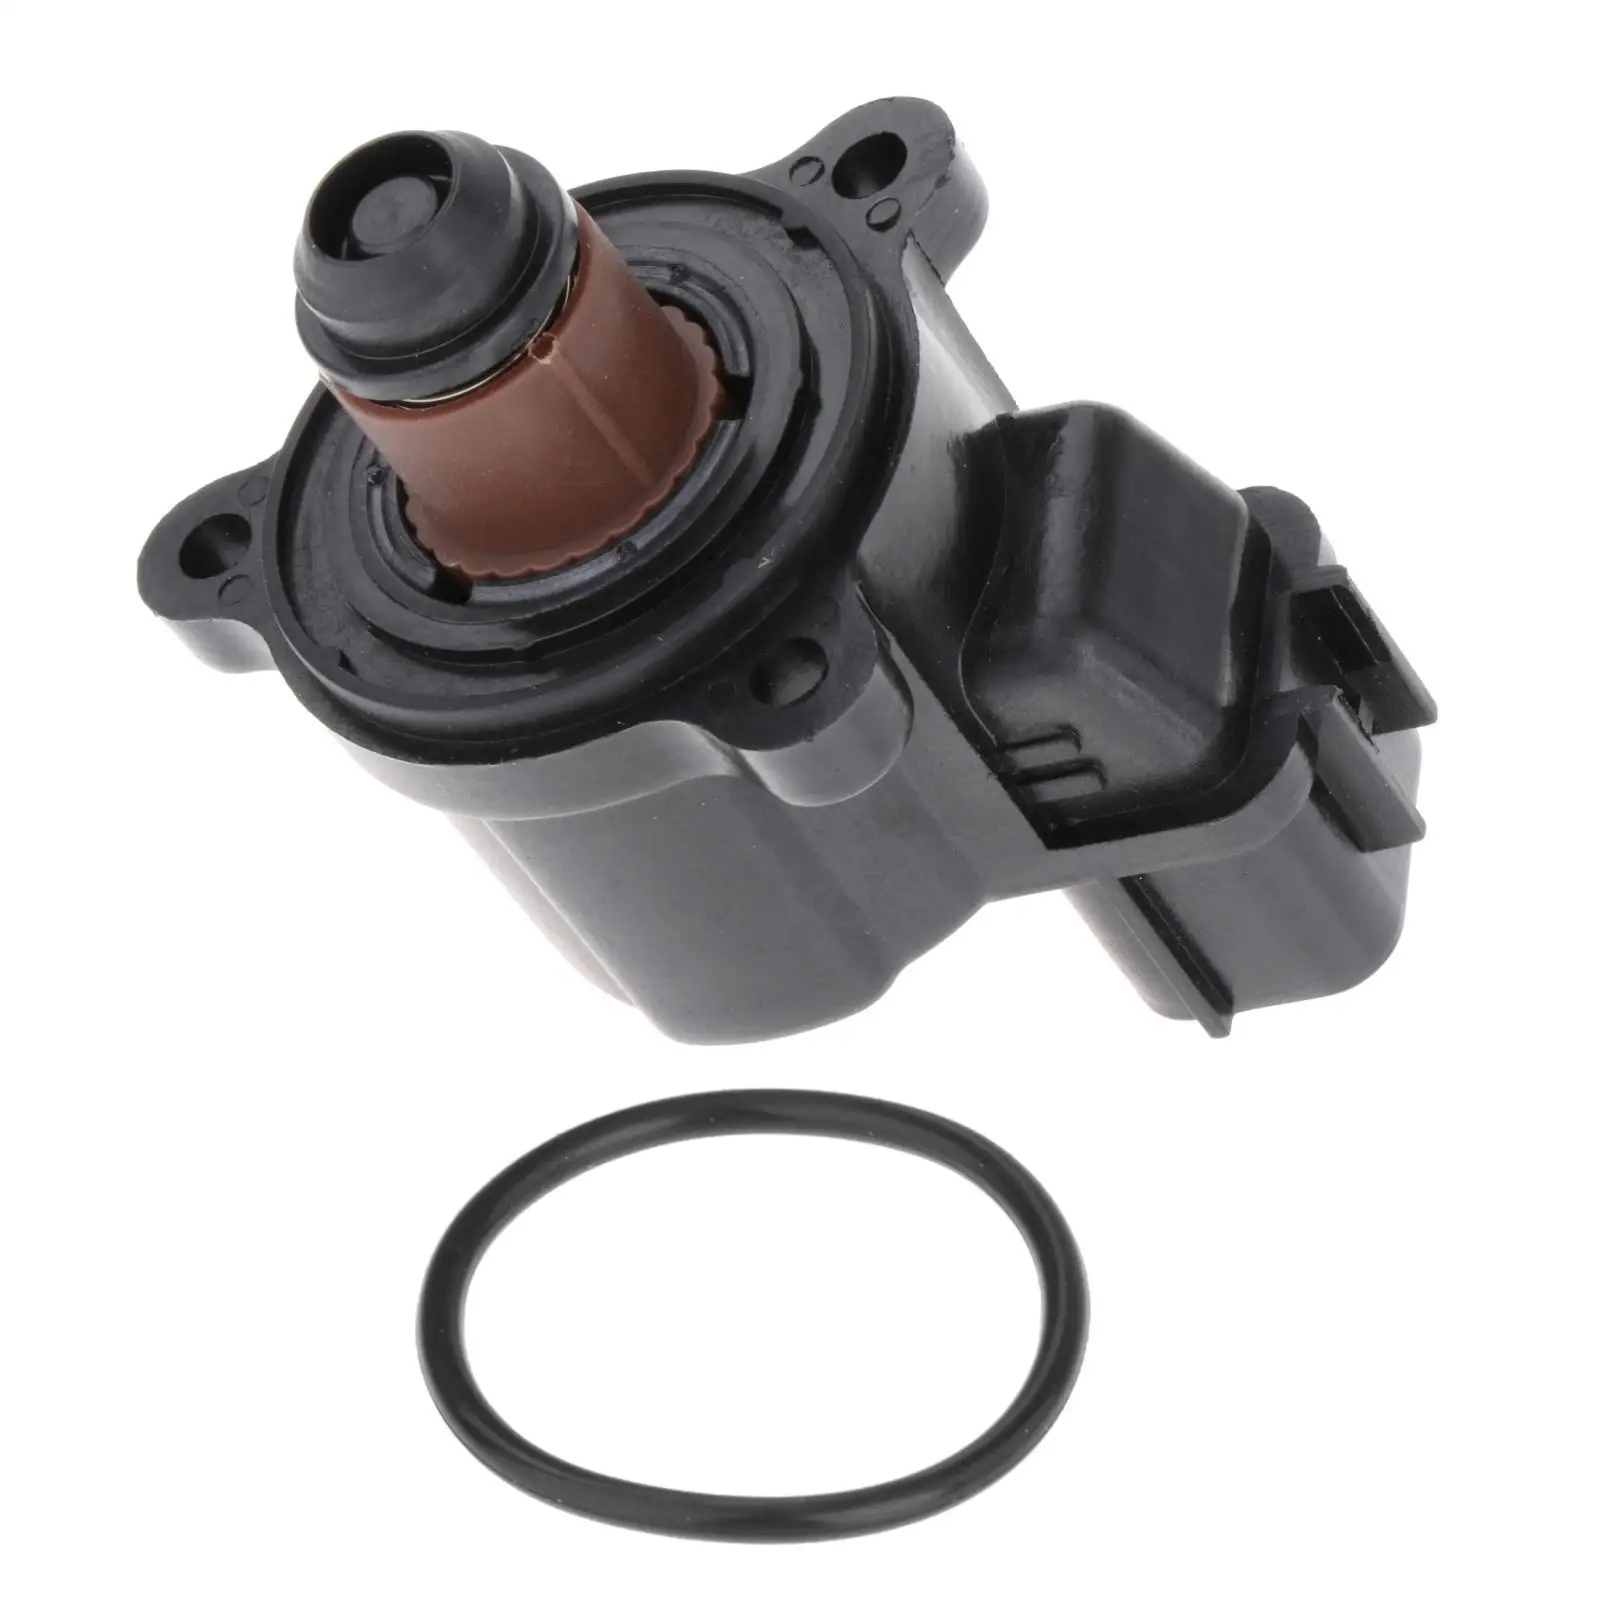 IAC Valve  18137-88L01-000 Accessories Replaces  for  Outboard Motor DF40  ,DF60 DF70, 1813788L01 Motorbikes Supplies